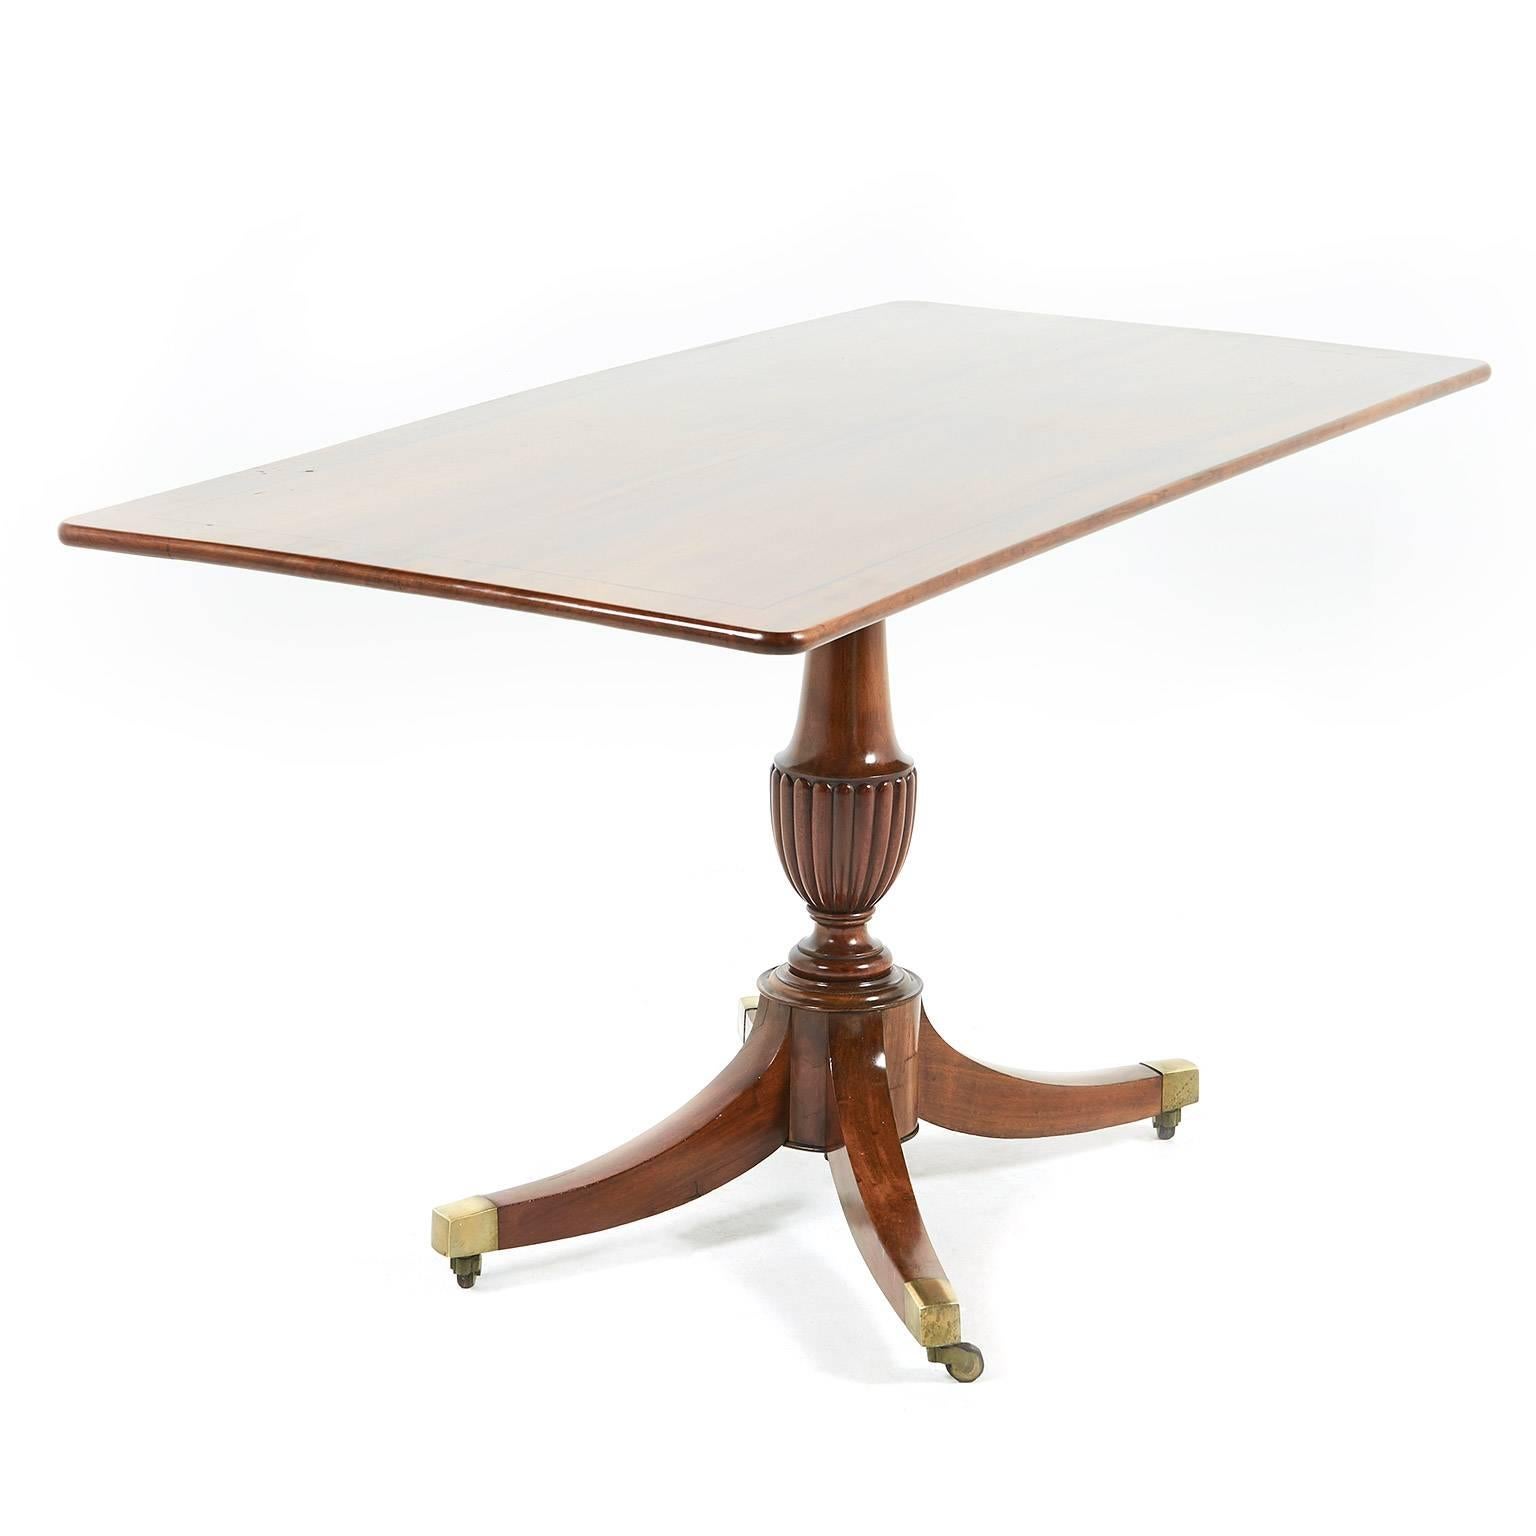 An antique English tilt-top breakfast table of unusually-narrow proportions. The top is comprised of solid Cuban mahogany with inlaid ebony stringing, standing on a pedestal base with out-swept ‘sabre’ legs terminating in original brass and leather